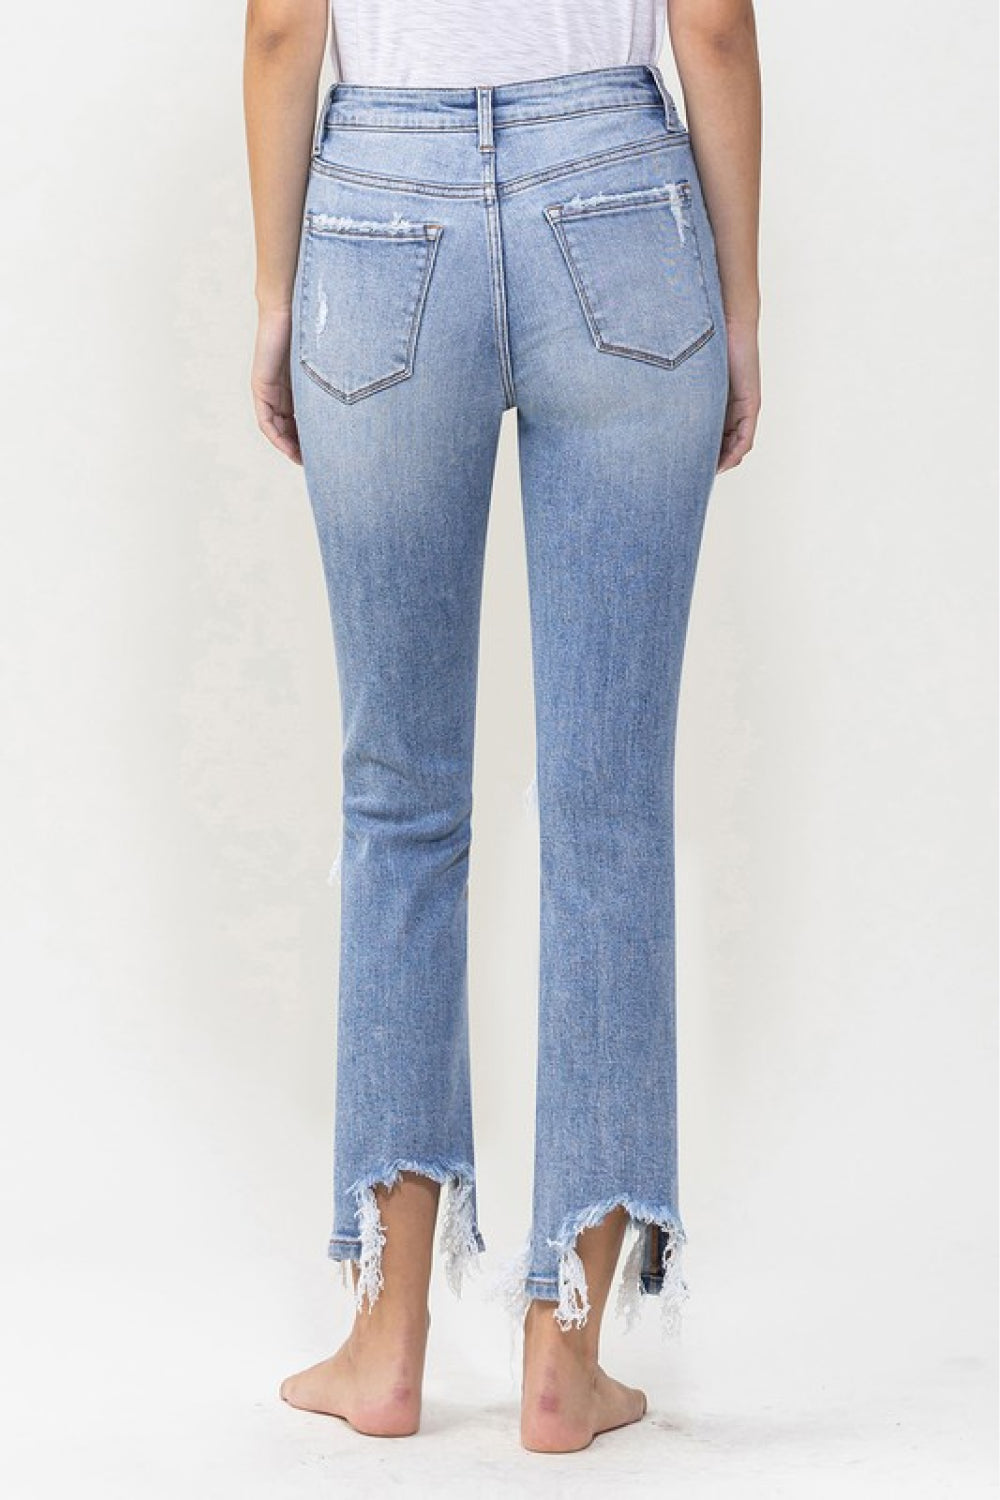 - Lovervet Full Size Courtney Super High Rise Kick Flare Jeans - Ships from The US - womens jeans at TFC&H Co.